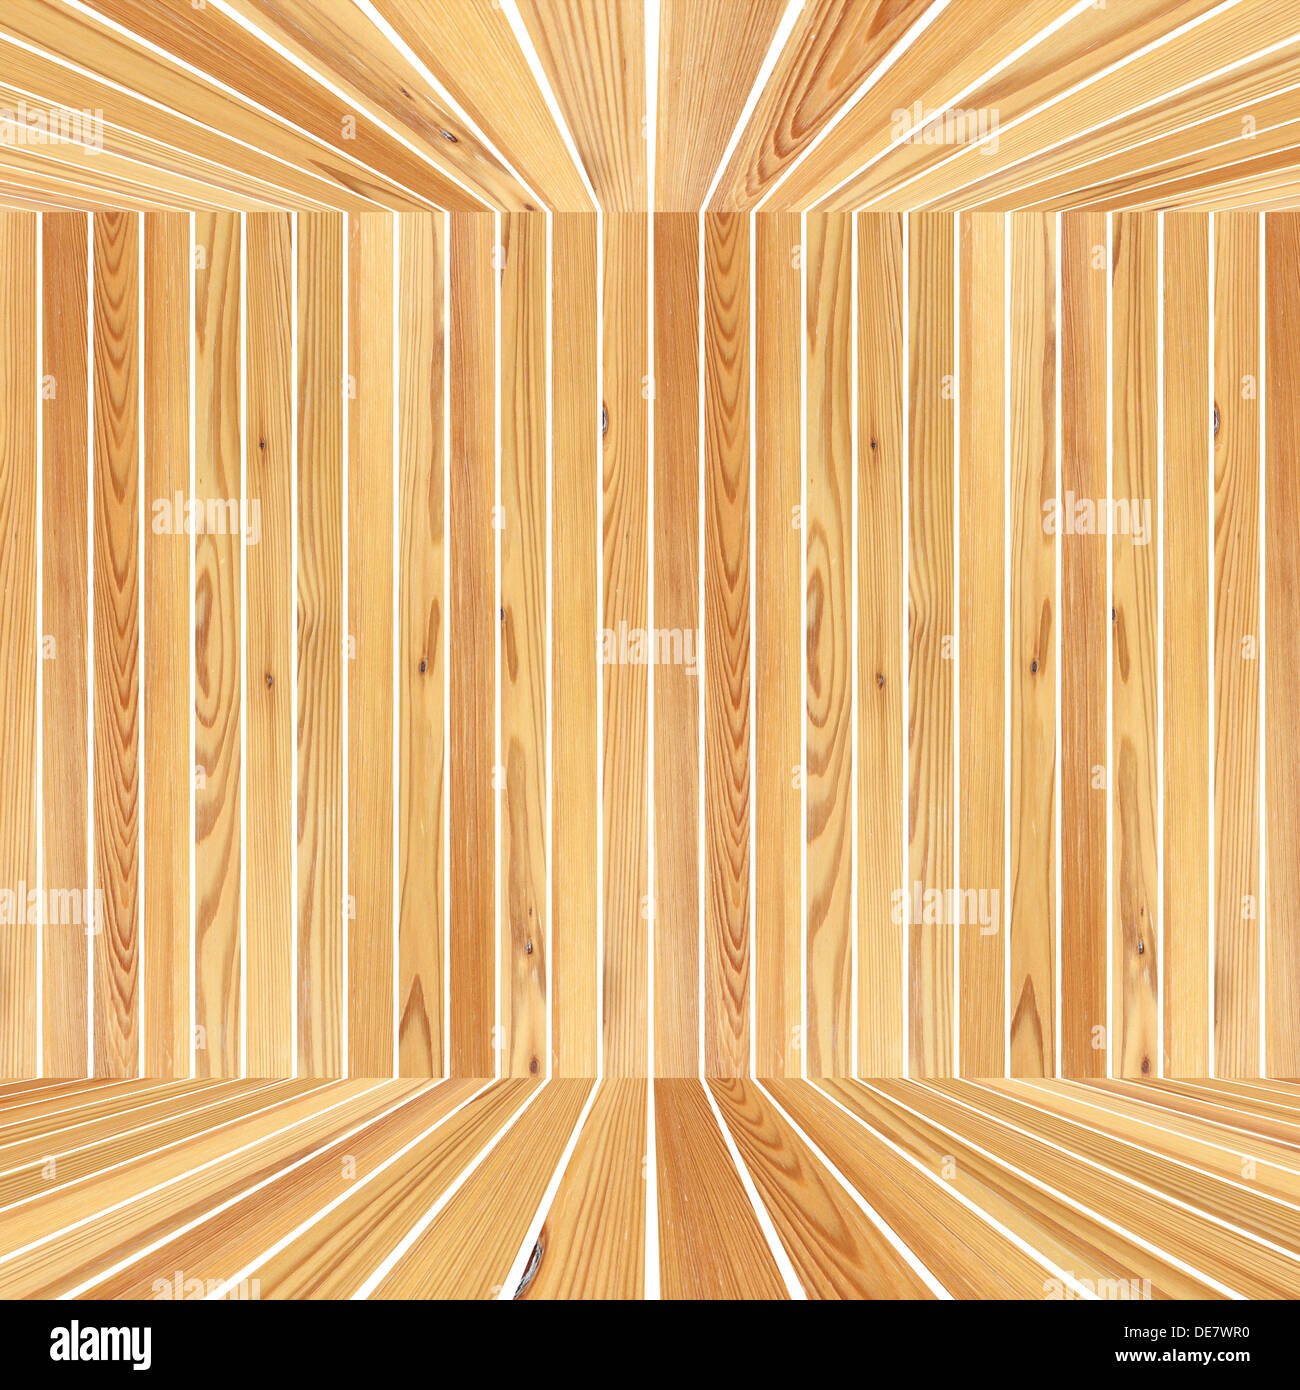 abstract wooden structure formed by planks over white Stock Photo